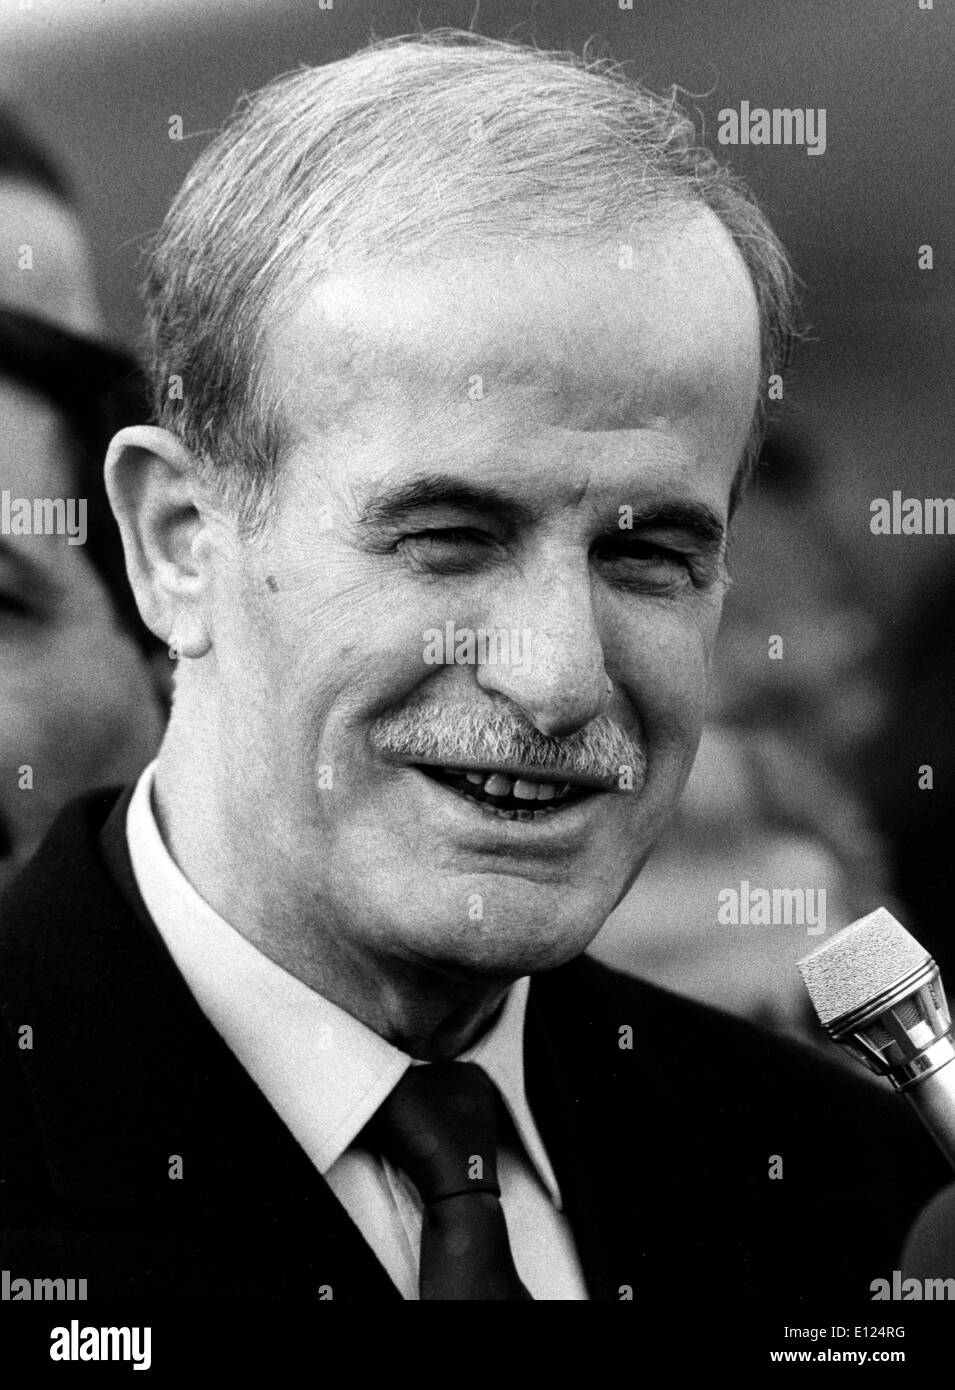 Nov 23, 1990; Geneva, Switzerland; Syrian President HAFEZ EL ASSAD at a press conference after a meeting with US President Stock Photo